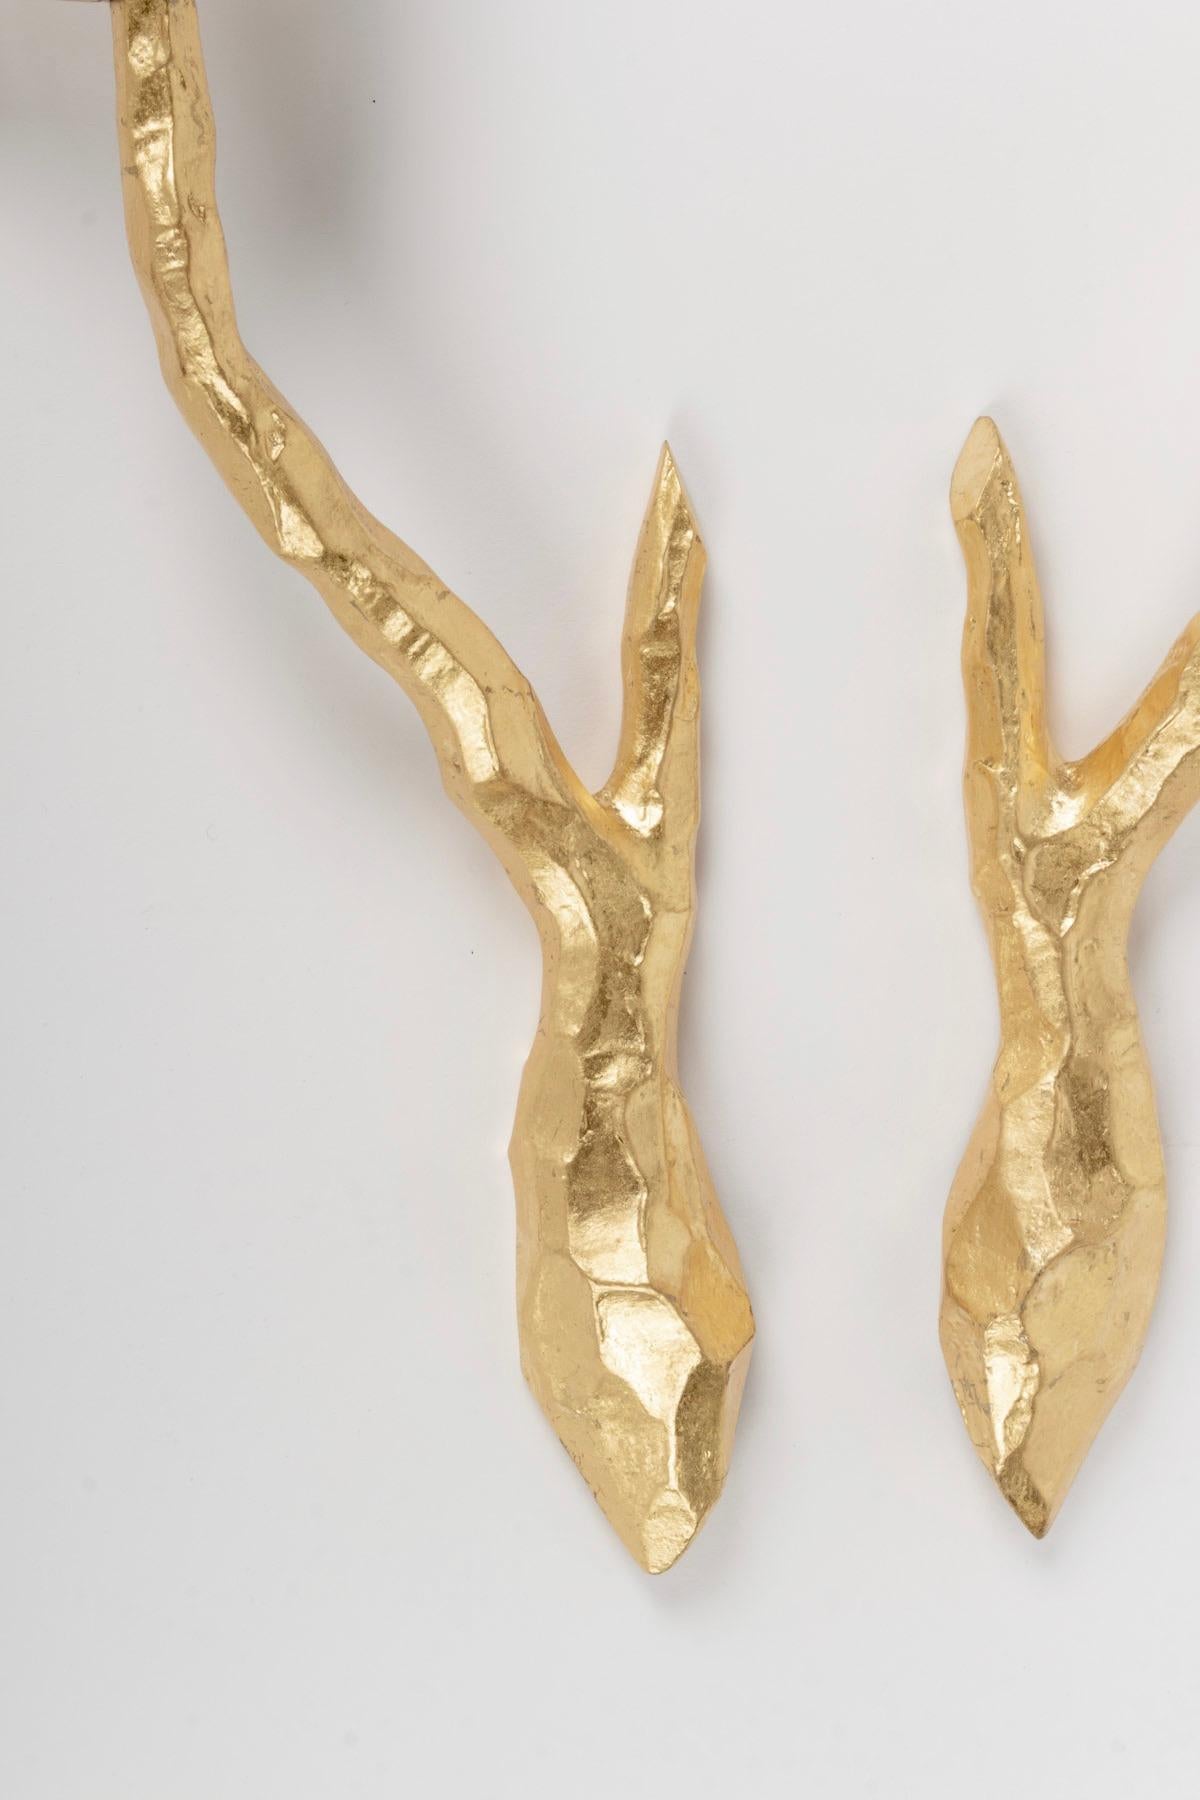 Elegant gilded bronze sconces designed by the Maison Arlus in the 1960s. The two arms figure a stylized branch. They hold the original cylindrical white satin glass shades.
One bulb per sconce.

   